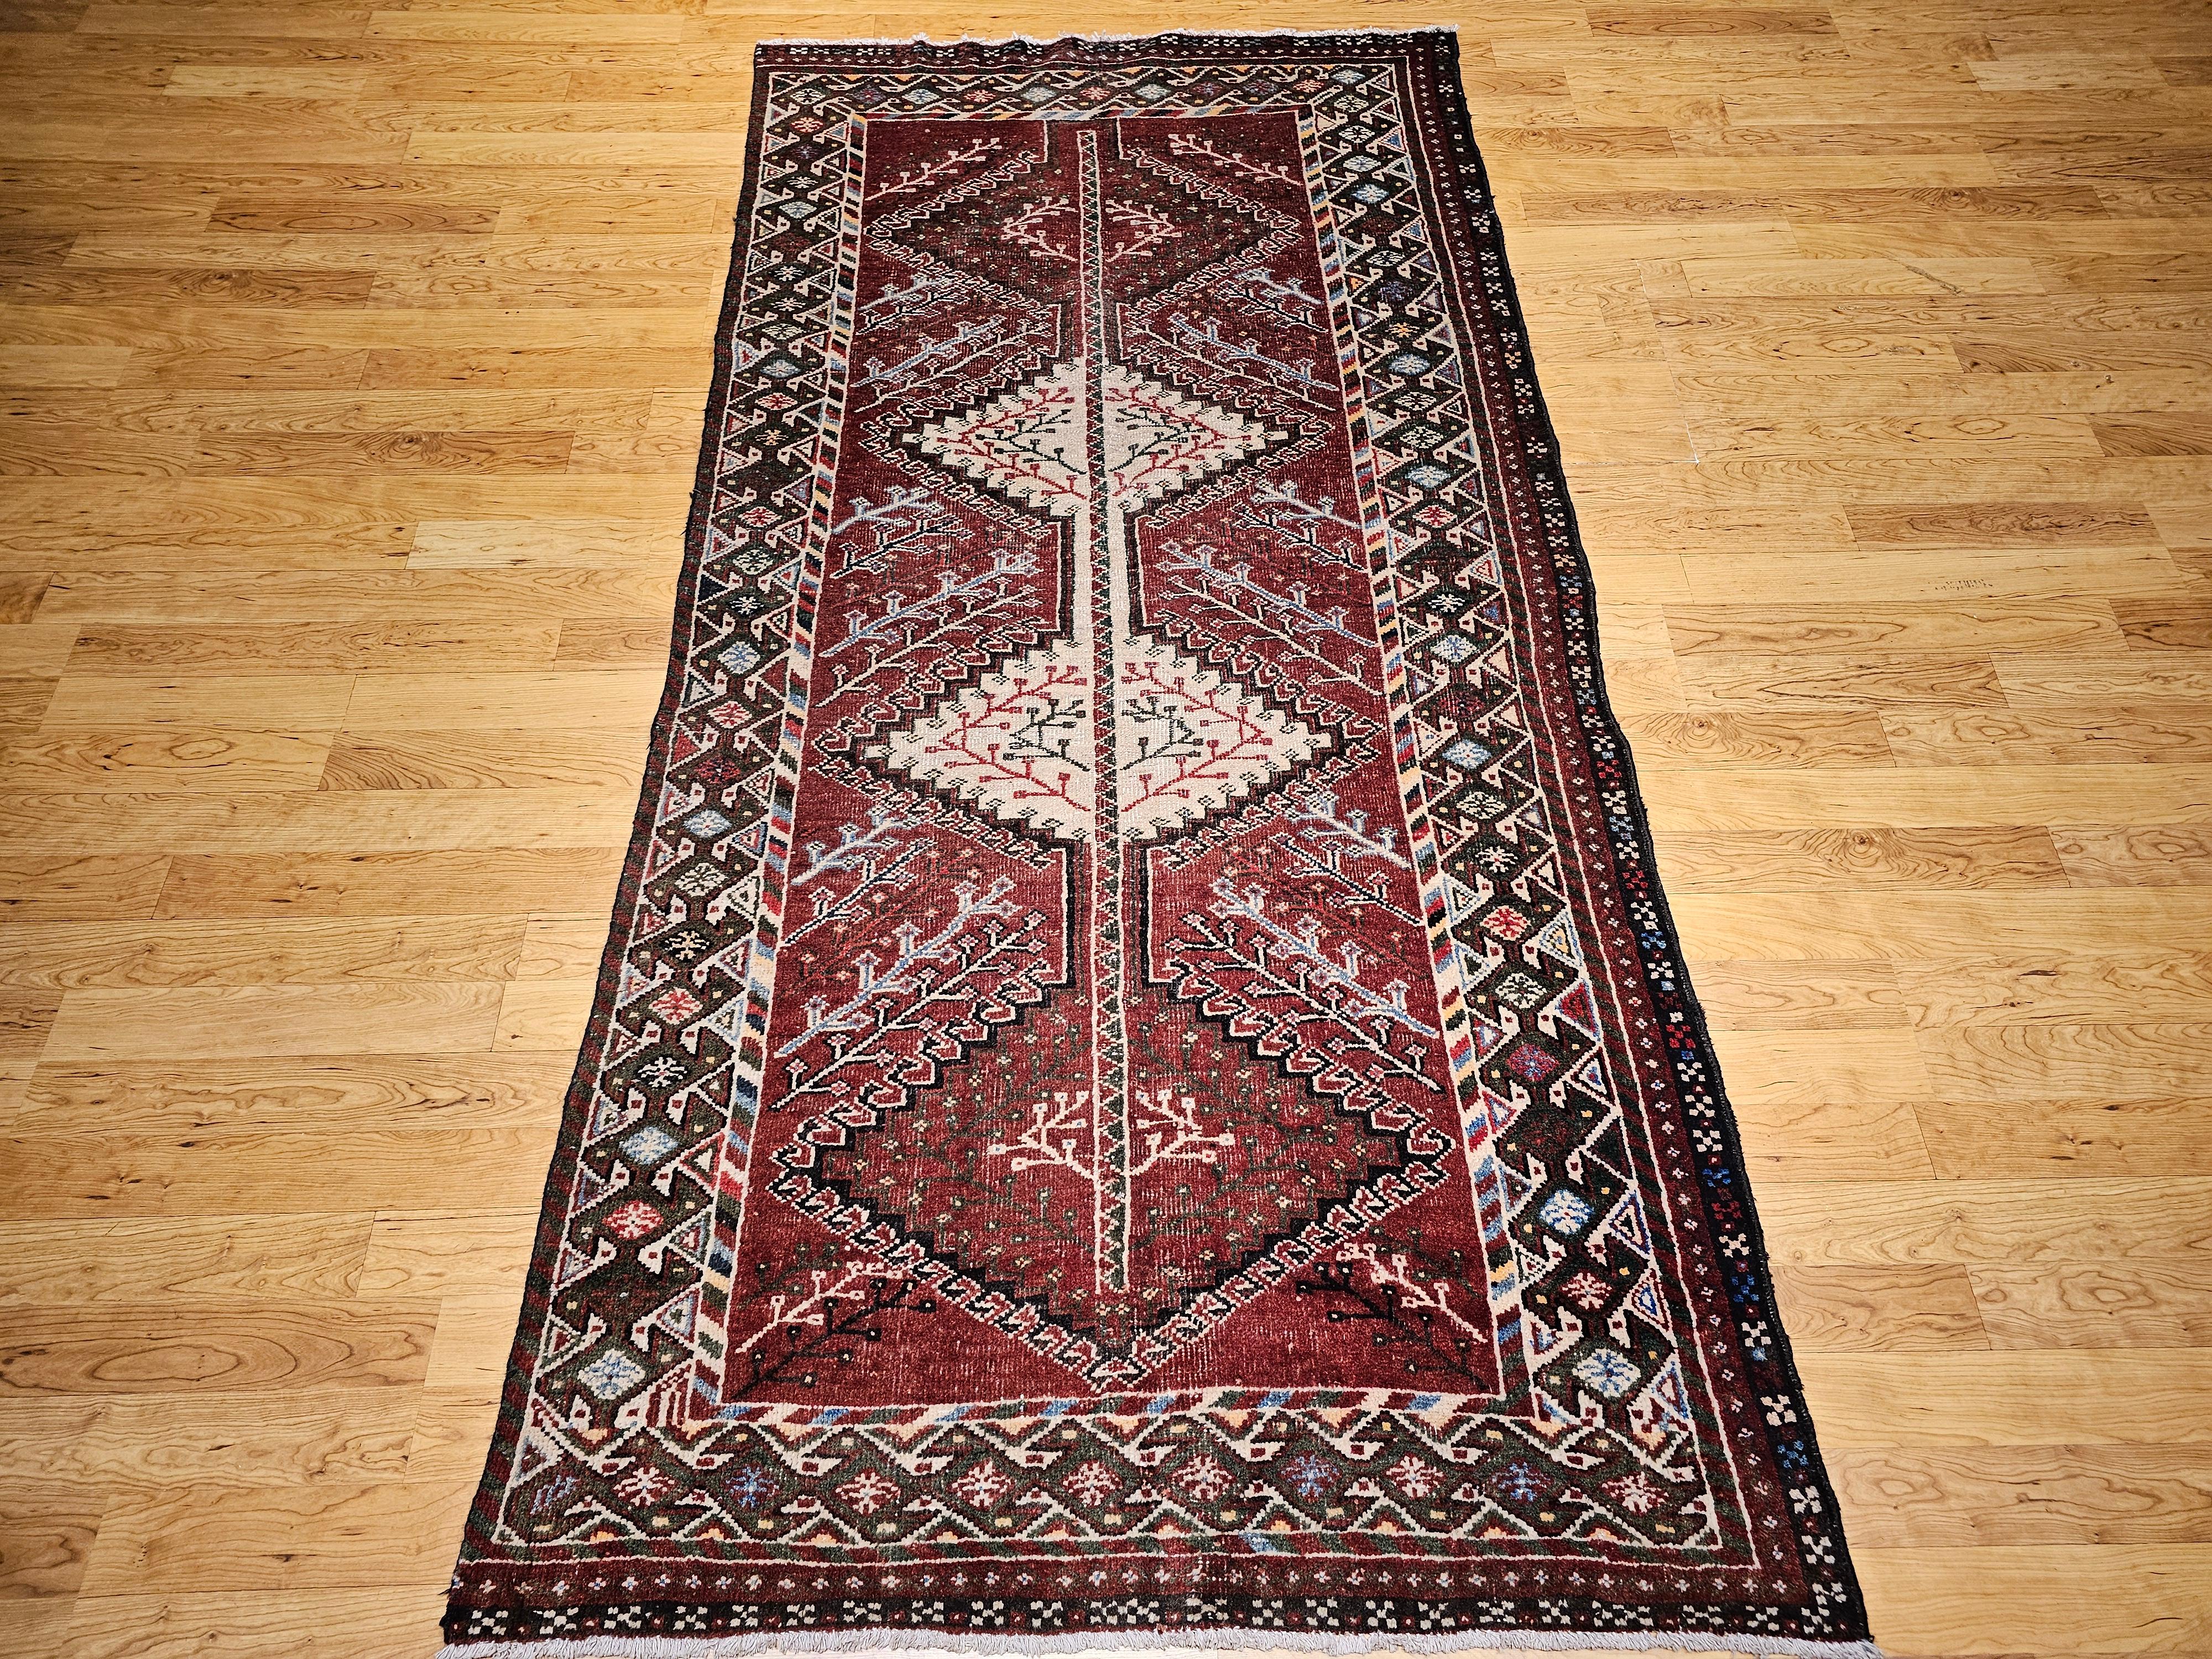 Vintage Persian Shiraz area rug / wide runner from Southwestern Persia comes in a rich burgundy color background. The main design of this vintage Shiraz rug is a connected series of small medallions containing vine patterns. The border in dark green